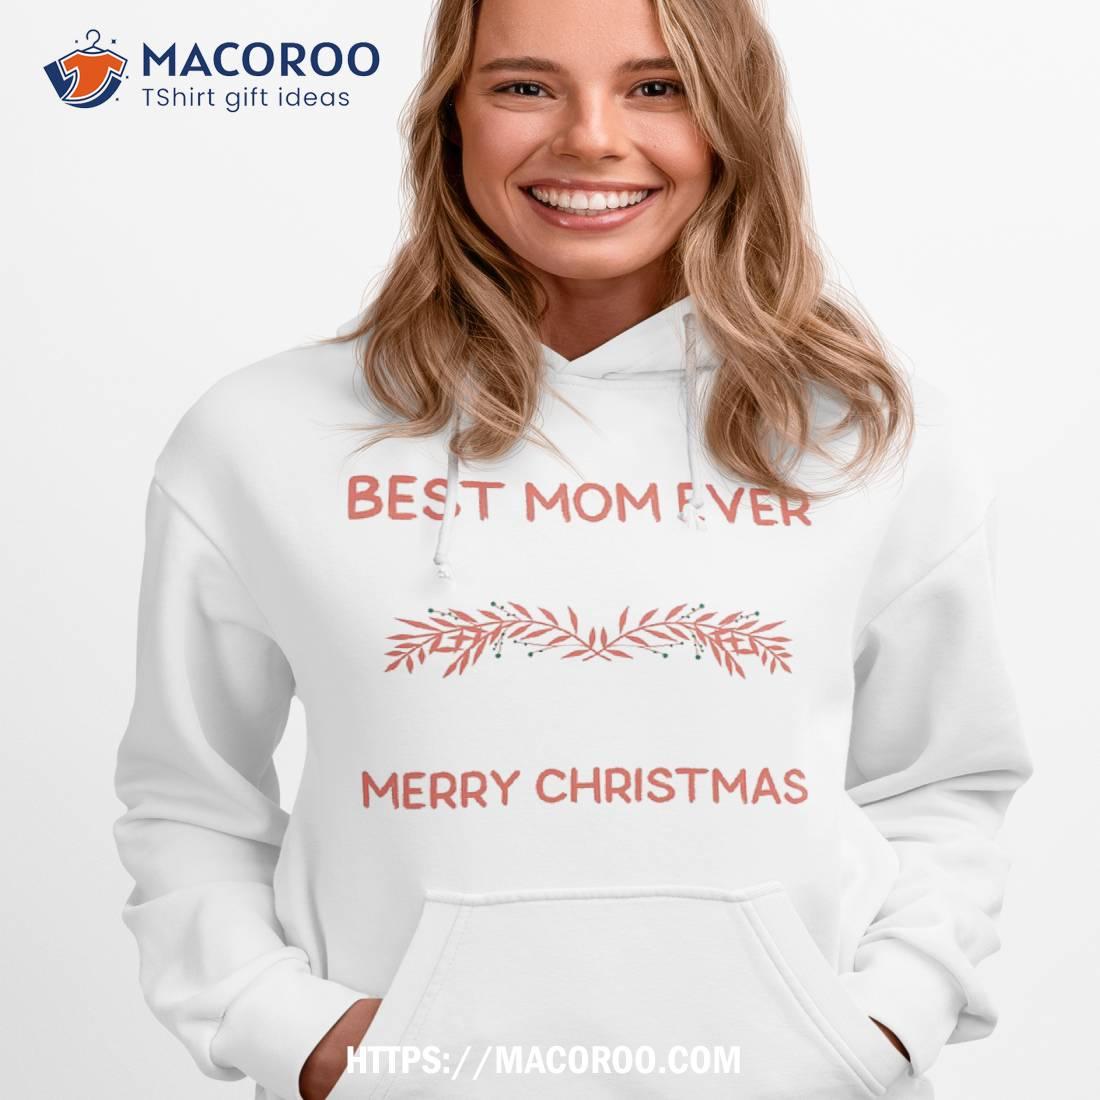 https://images.macoroo.com/wp-content/uploads/2023/08/best-mom-ever-merry-christmas-shirt-good-christmas-gifts-for-your-mom-hoodie-1.jpg